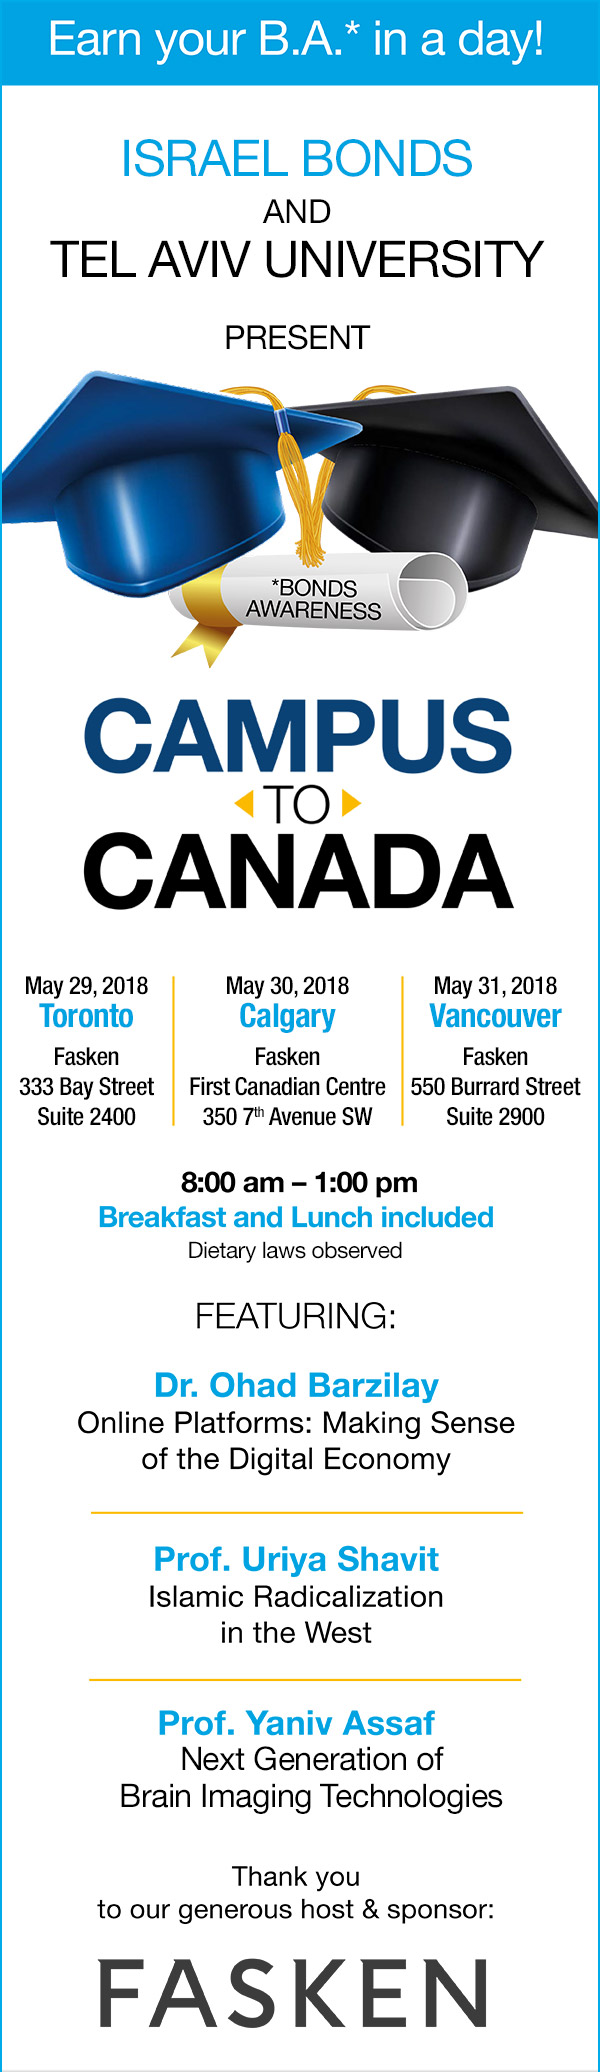 Israel Bonds and Tel Aviv University Present Campus to Canada - May 29-31 2018 in Toronto, Calgary and Vancouver